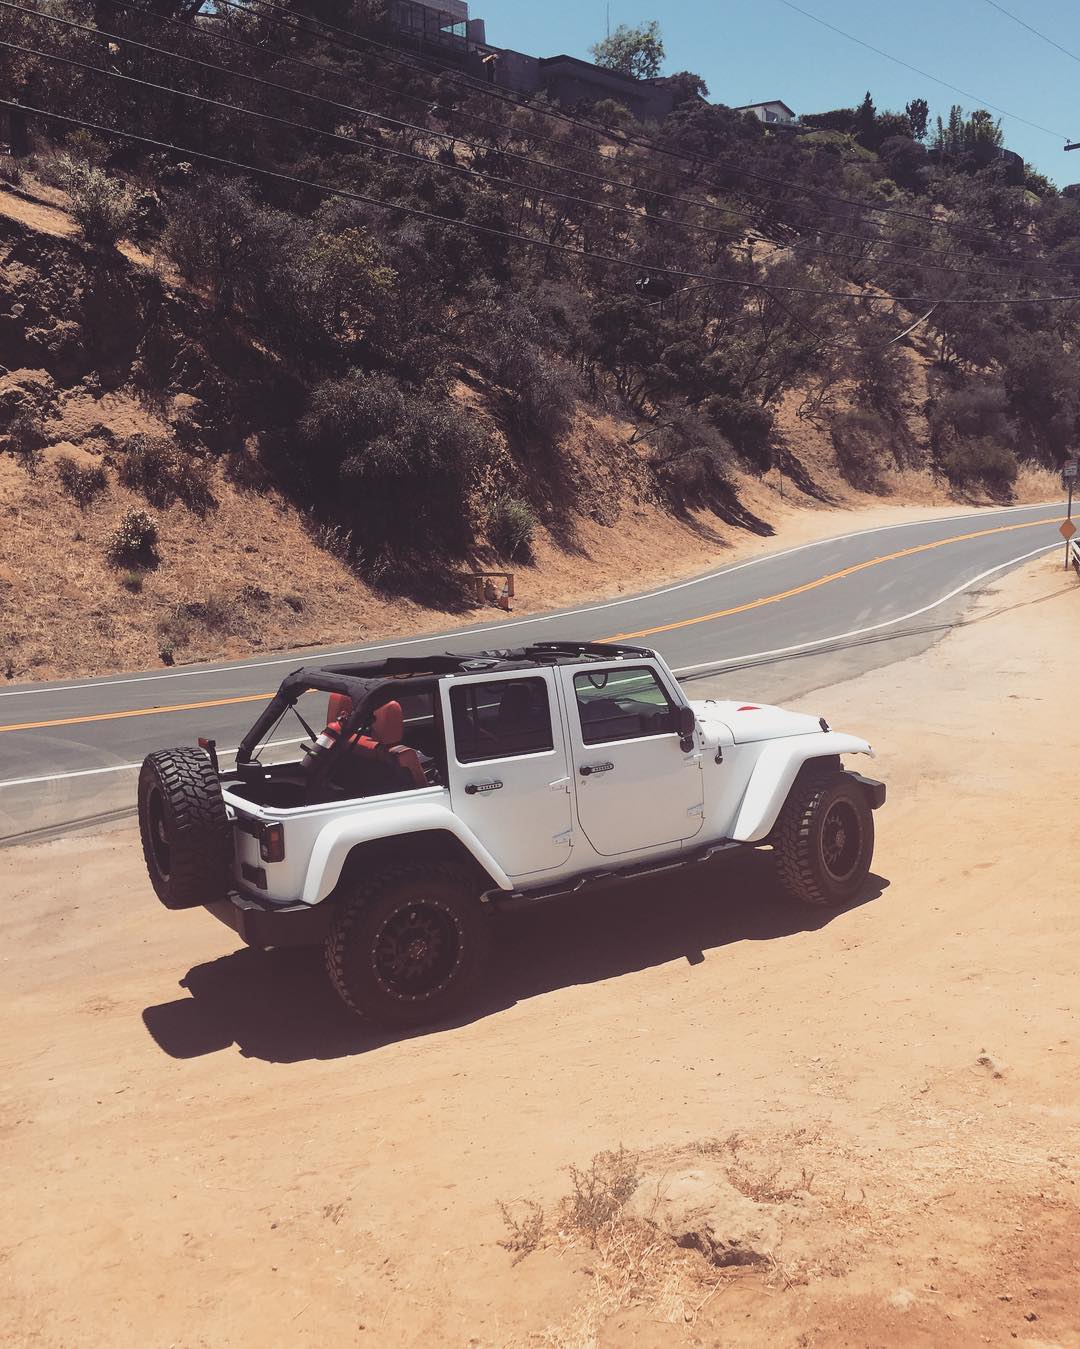 I guess if I have to get lost, Beverly Hills/Mulholland, with a white Jeep Wrangler would be one of my preferences. Making some noise in LA this week 💚